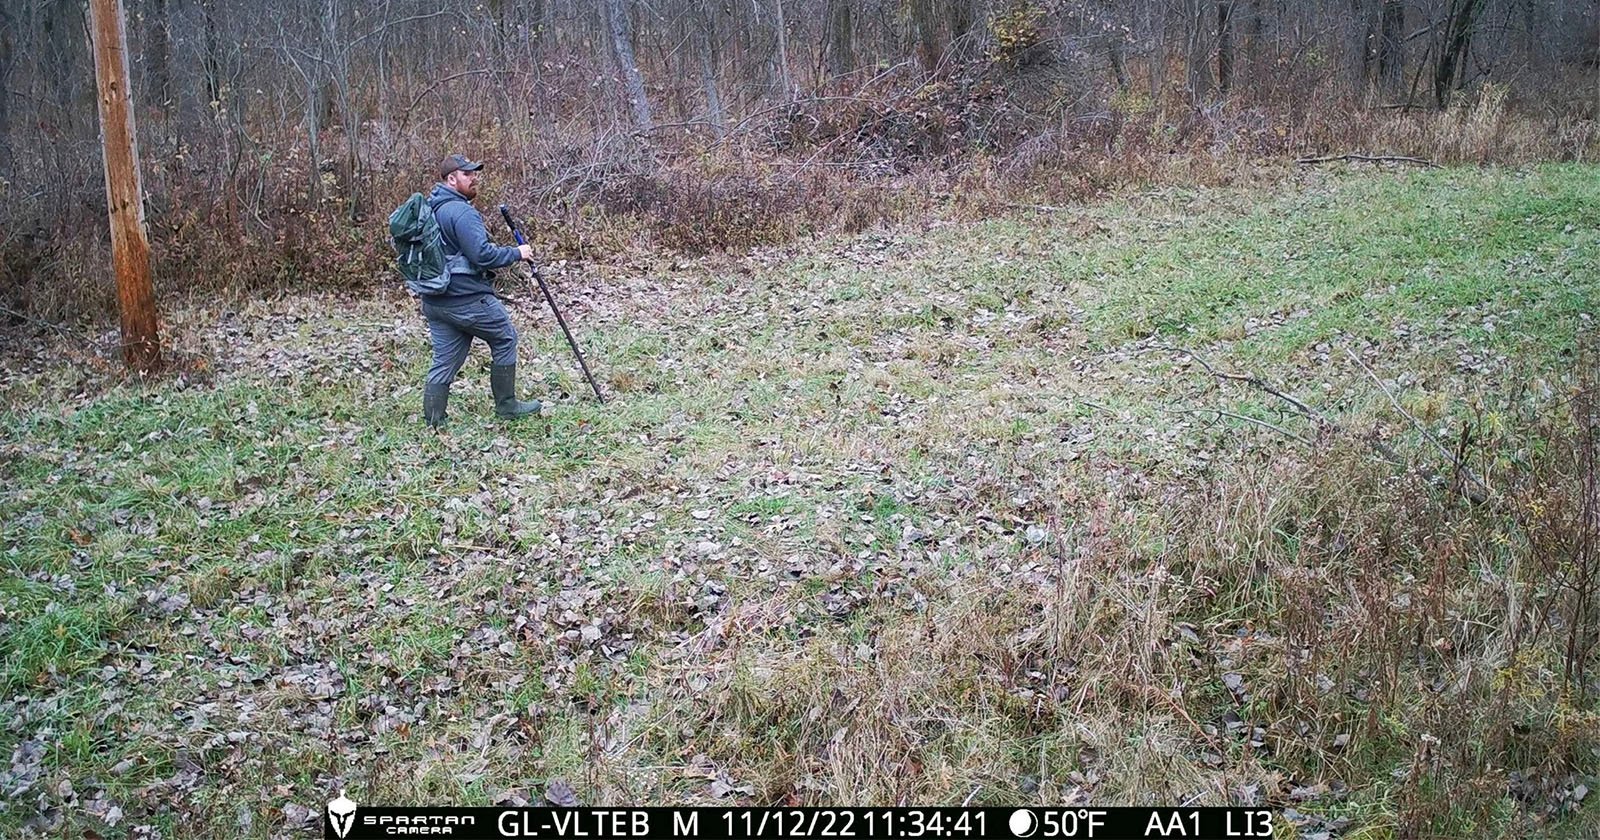  hunters posed nature photographers illegally take deer 